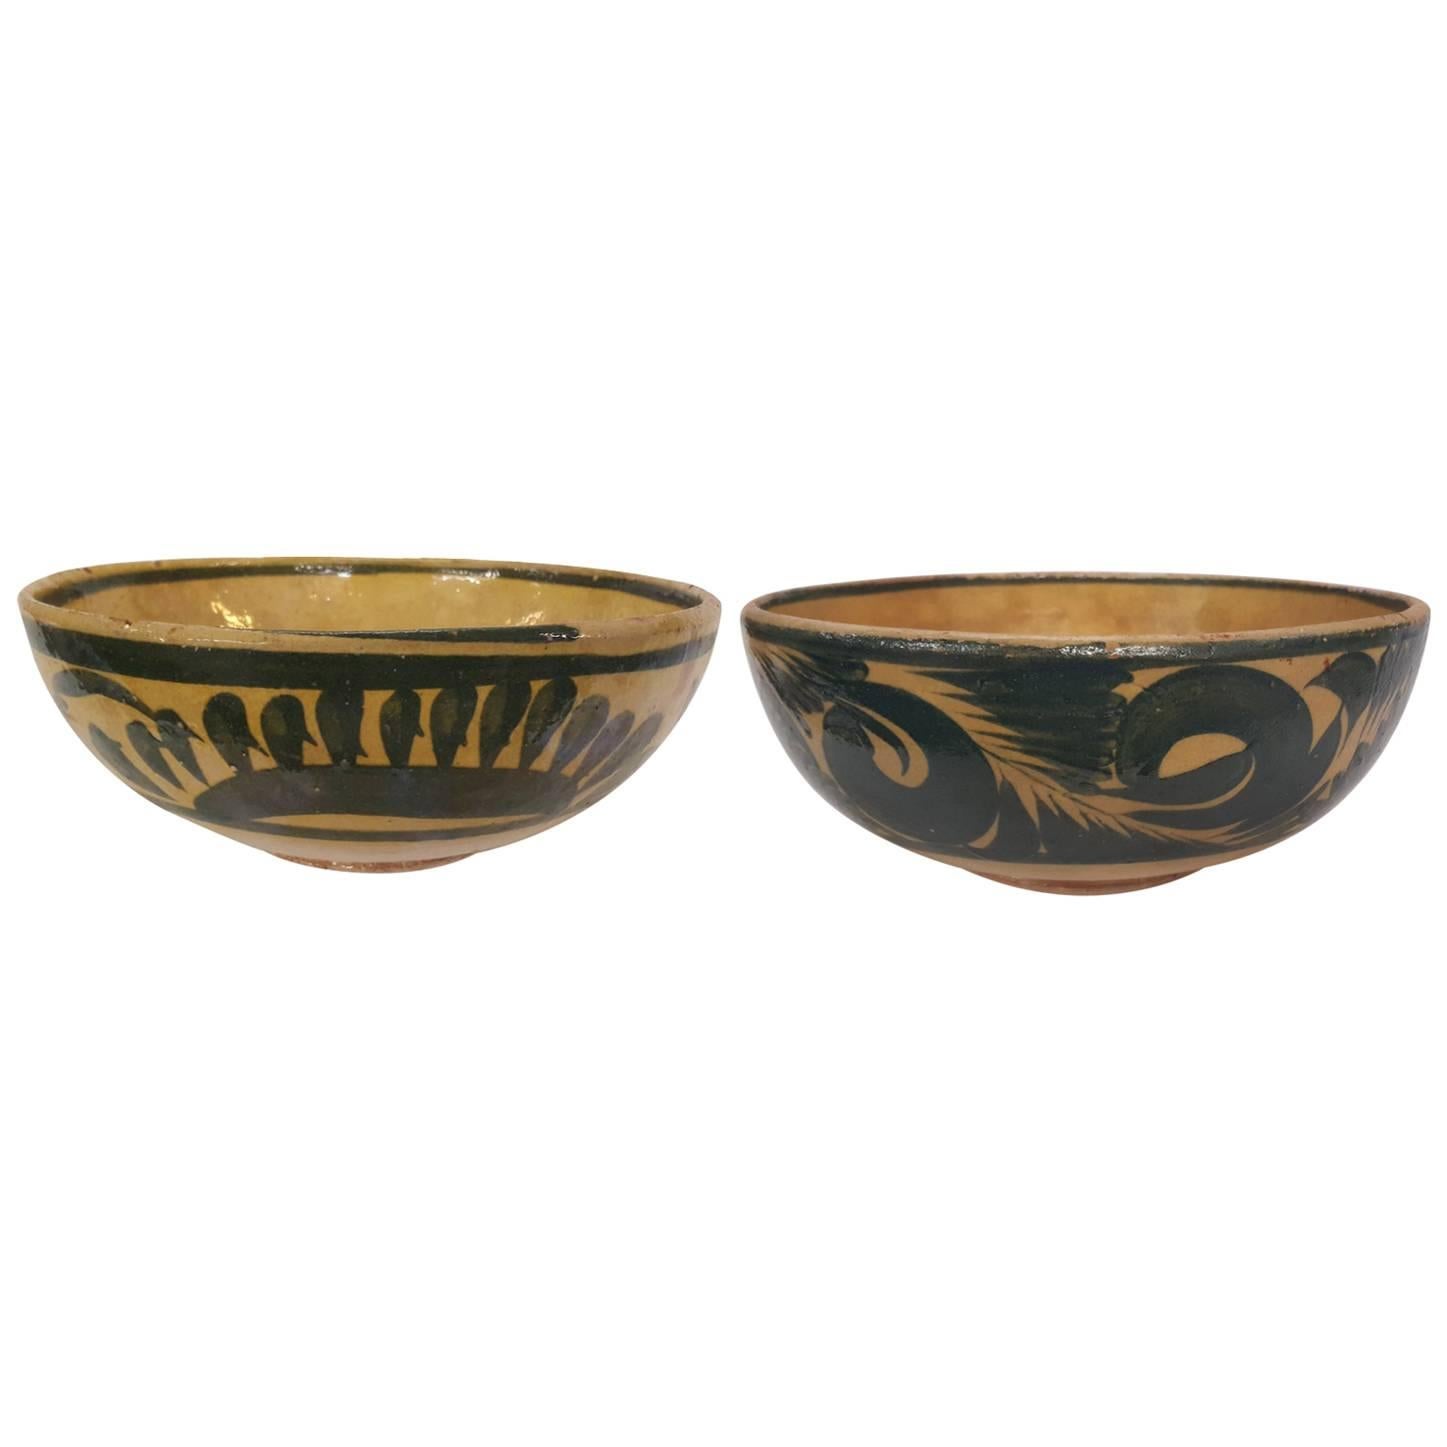 Two 20th Century, Mexican Pottery Bowls